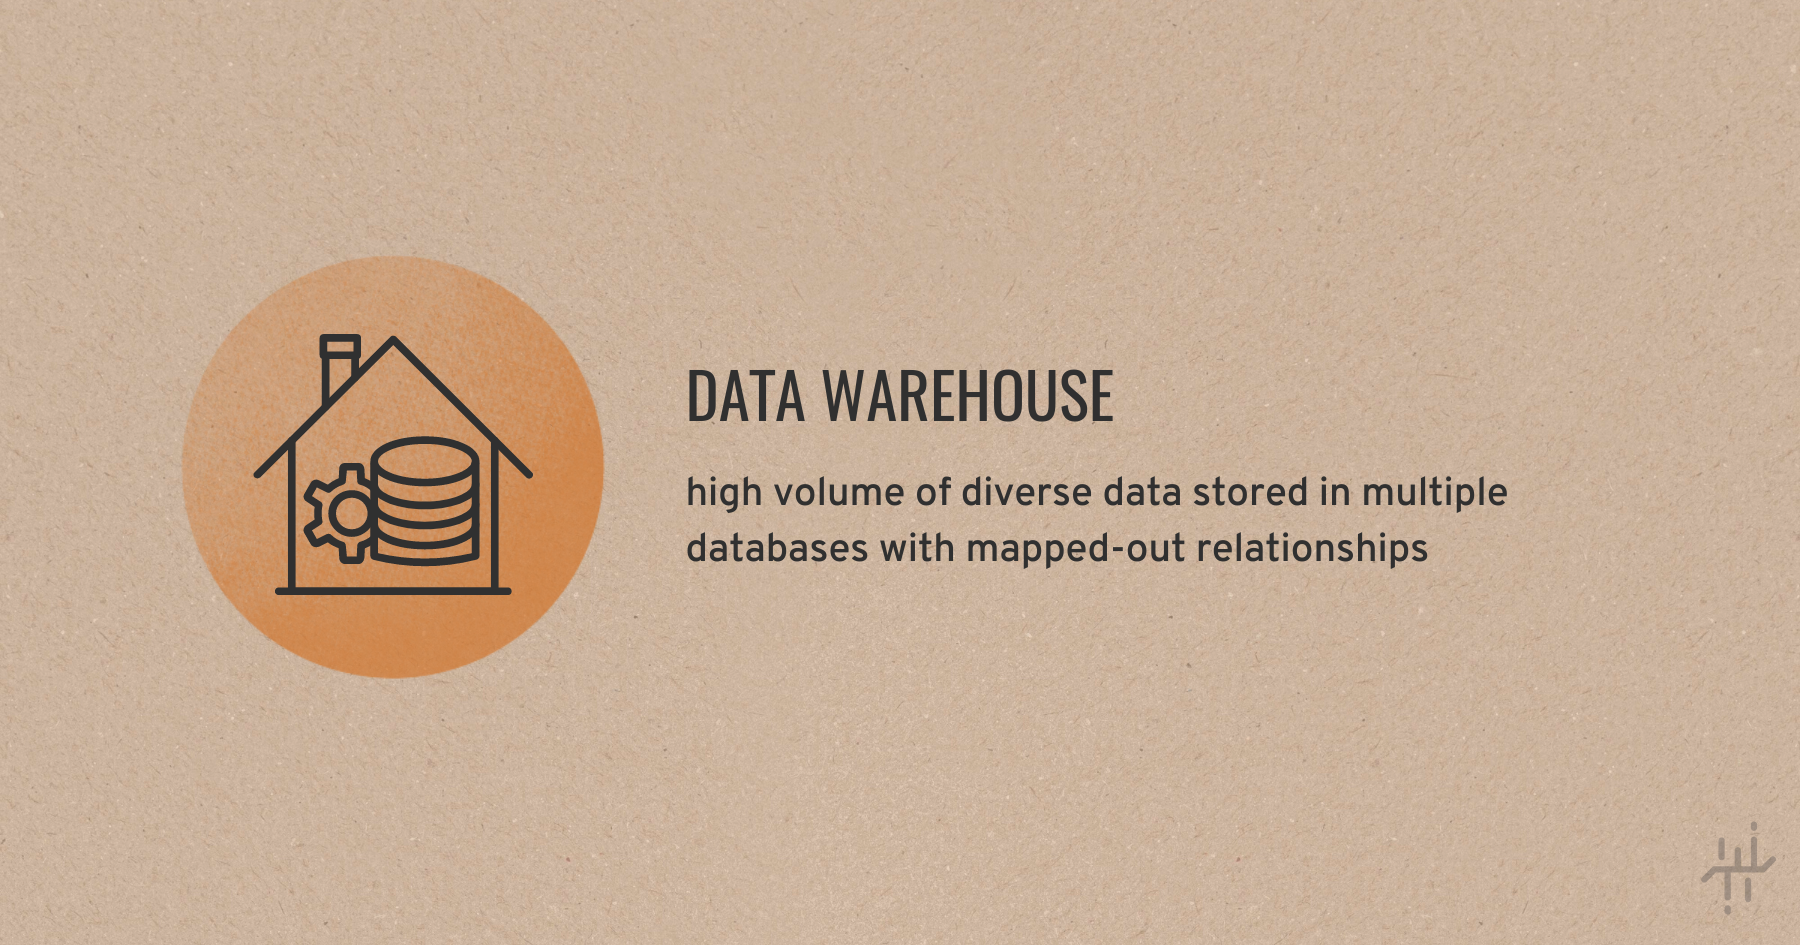 a graphic describing what a data warehouse is